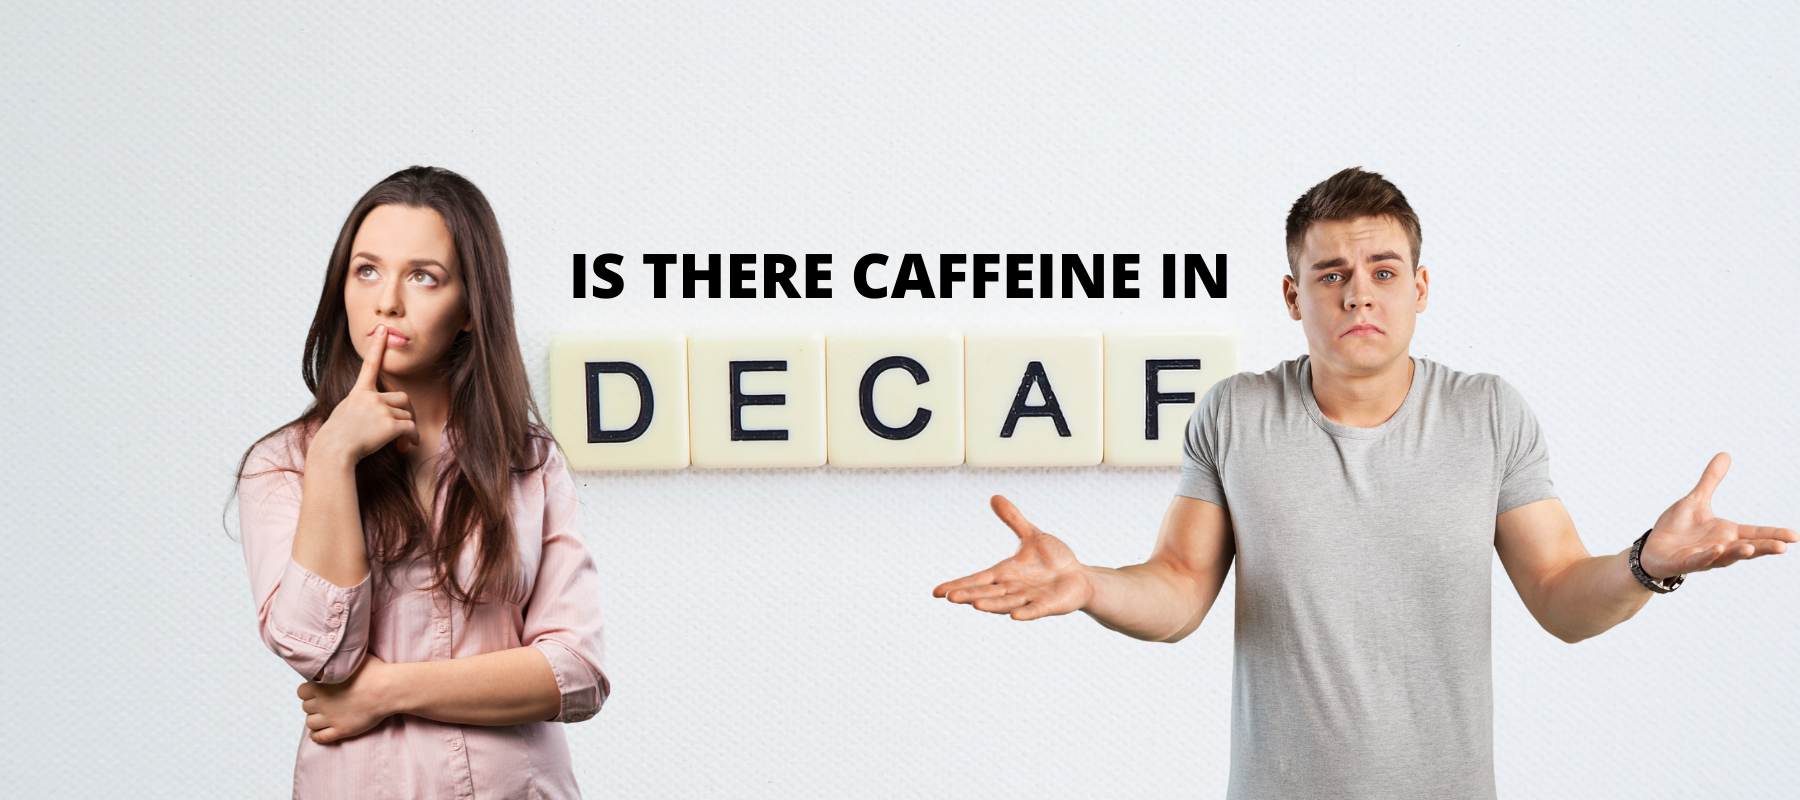 Funny image of two people pondering whether there's caffeine in decaf